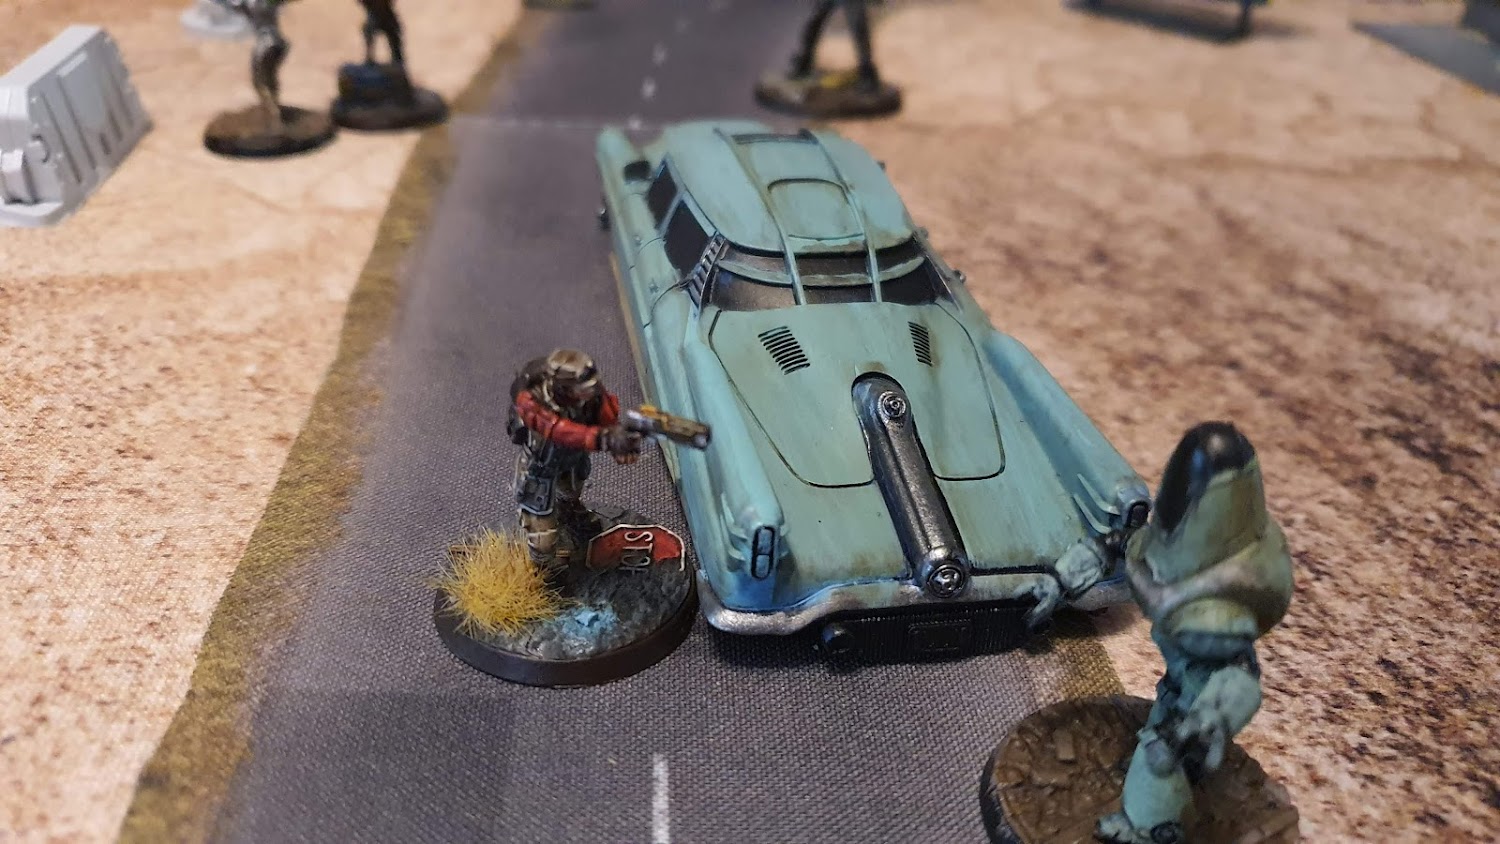 Fallout: Wasteland Warfare on the Tabletop